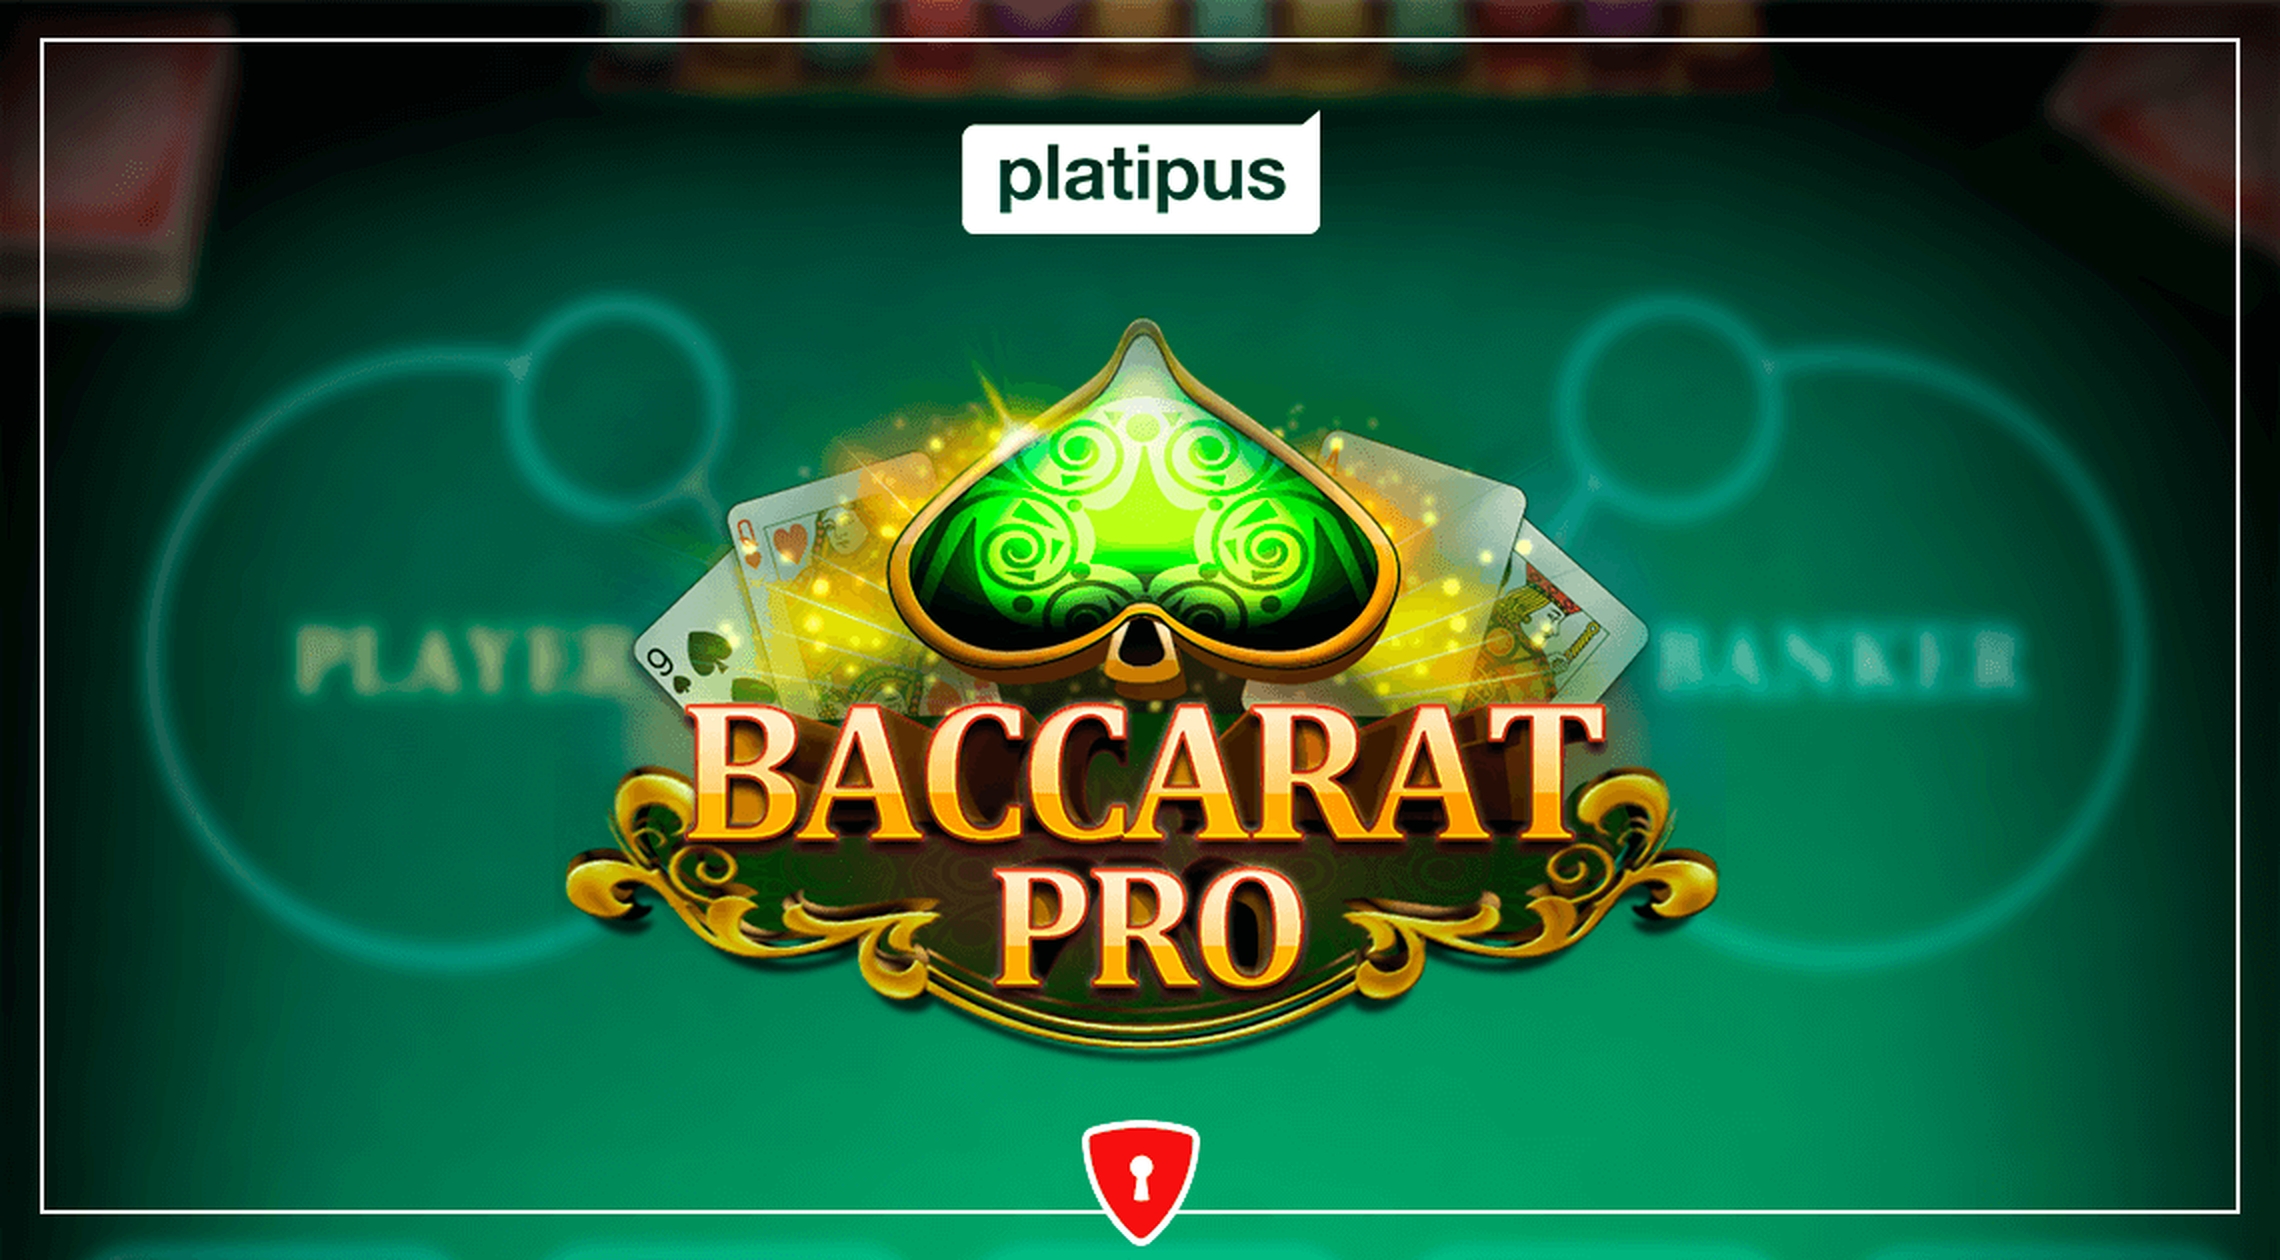 The Baccarat Pro Online Slot Demo Game by Platipus